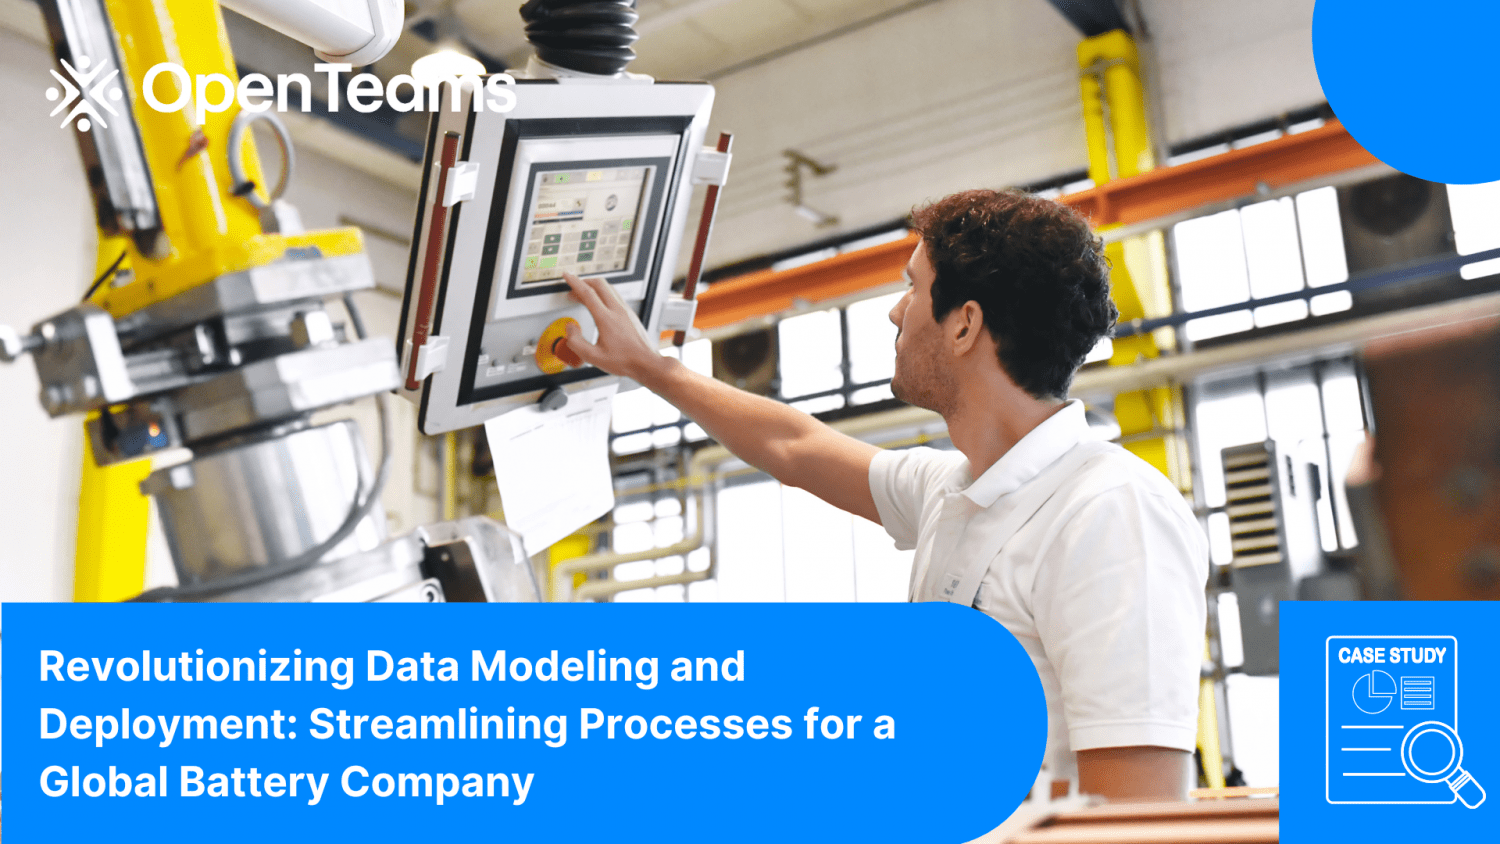 Revolutionizing Data Modeling and Deployment: Streamlining Processes for a Global Battery Company